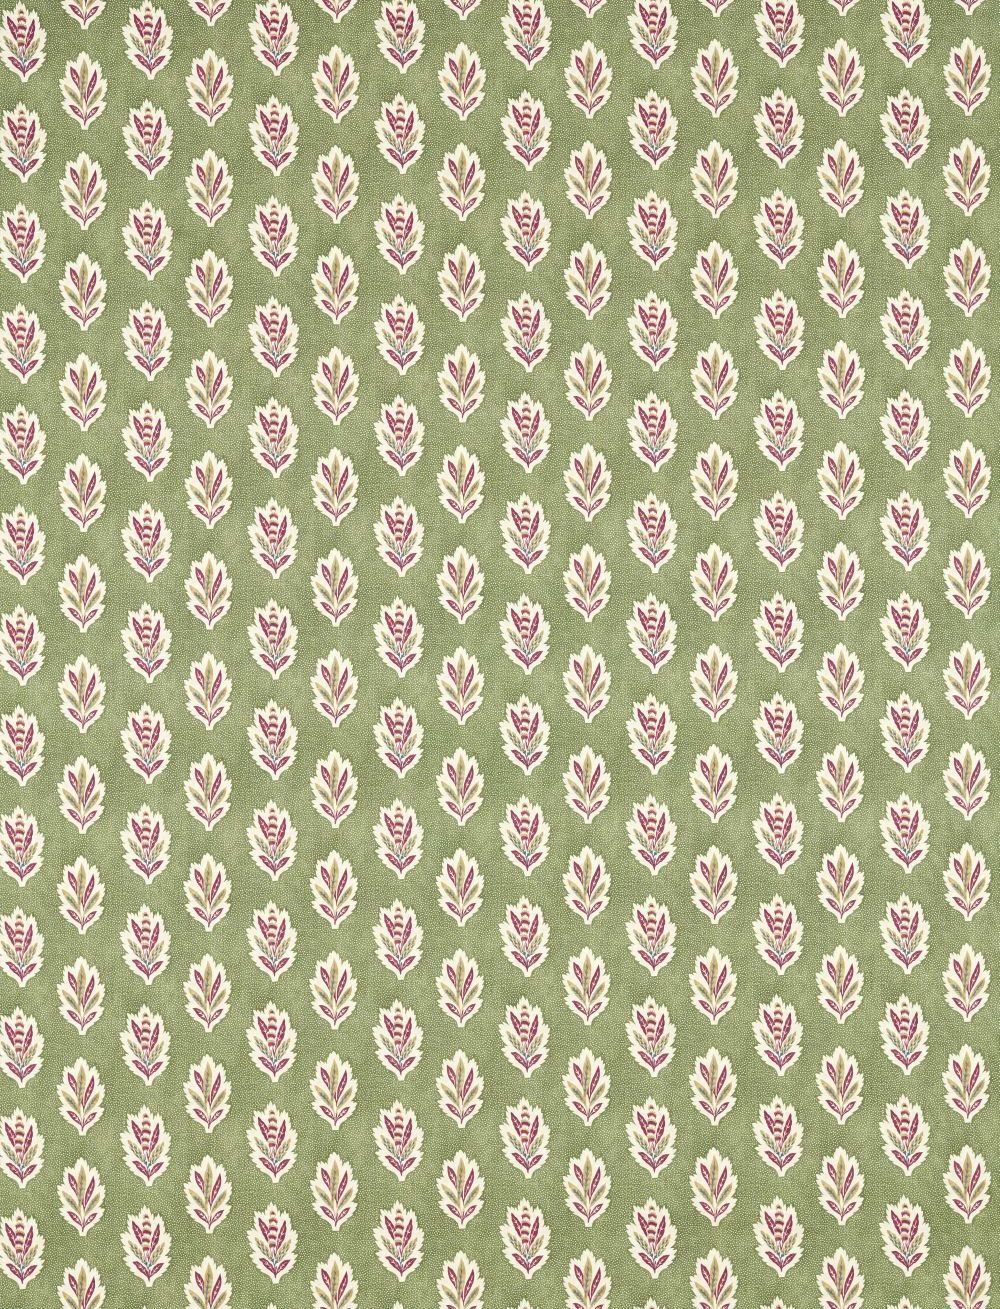 Sessile Leaf Fabric - Forest Green - by Sanderson